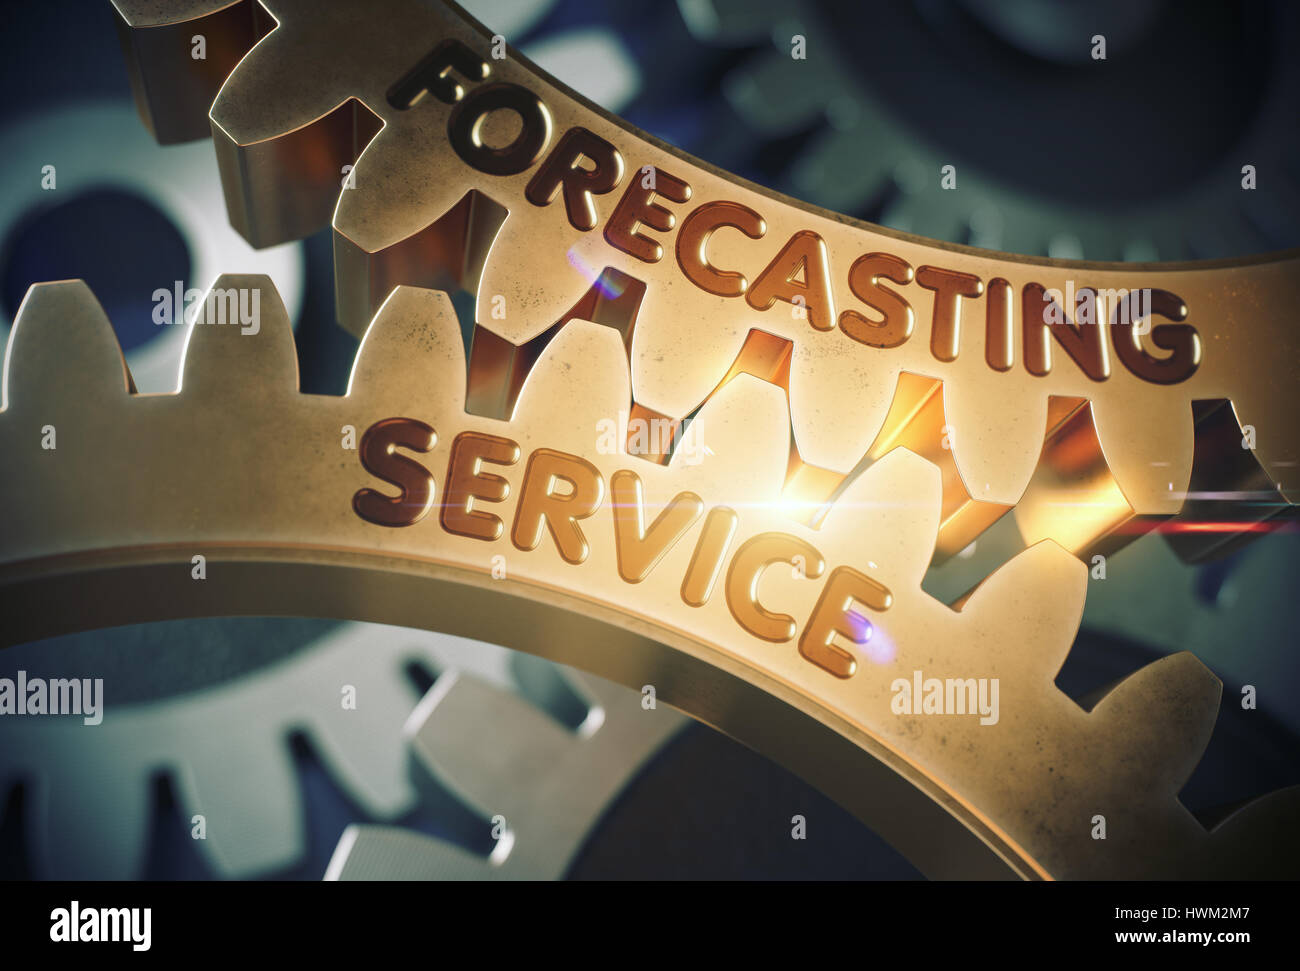 Forecasting Service Concept. Golden Gears. 3D Illustration. Stock Photo